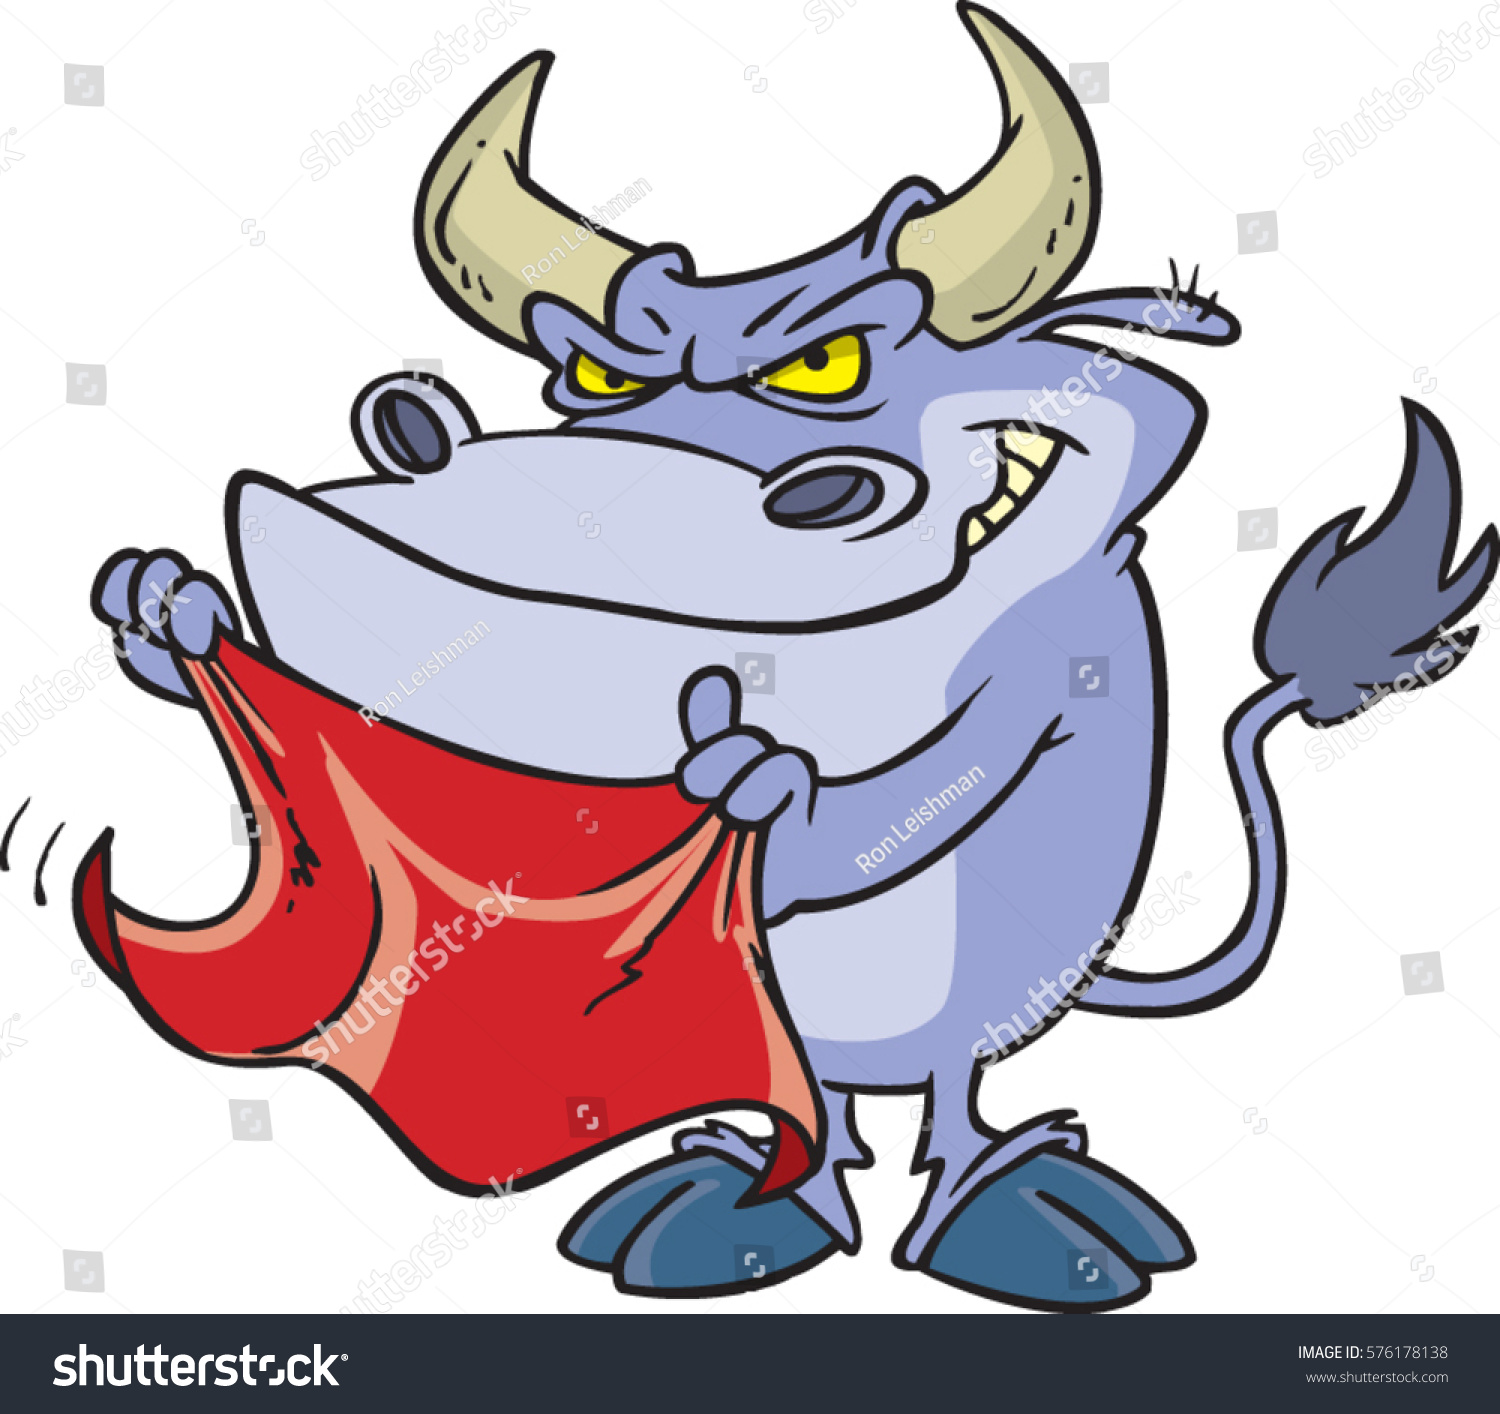 Cartoon Bull Holding Red Cape Stock Vector Royalty Free